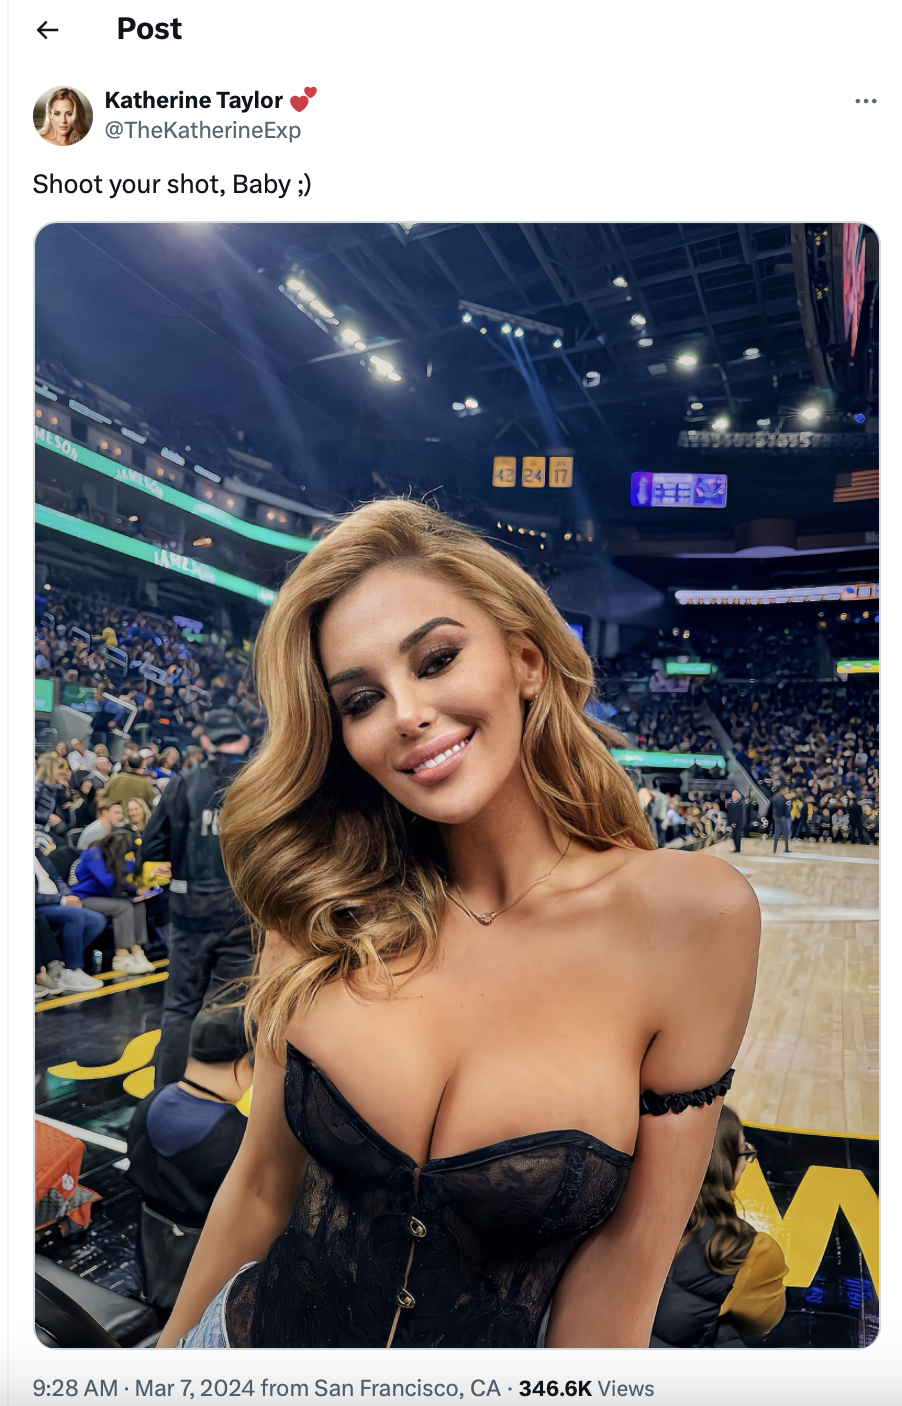 Woman in black top at basketball game with arena and crowd in background